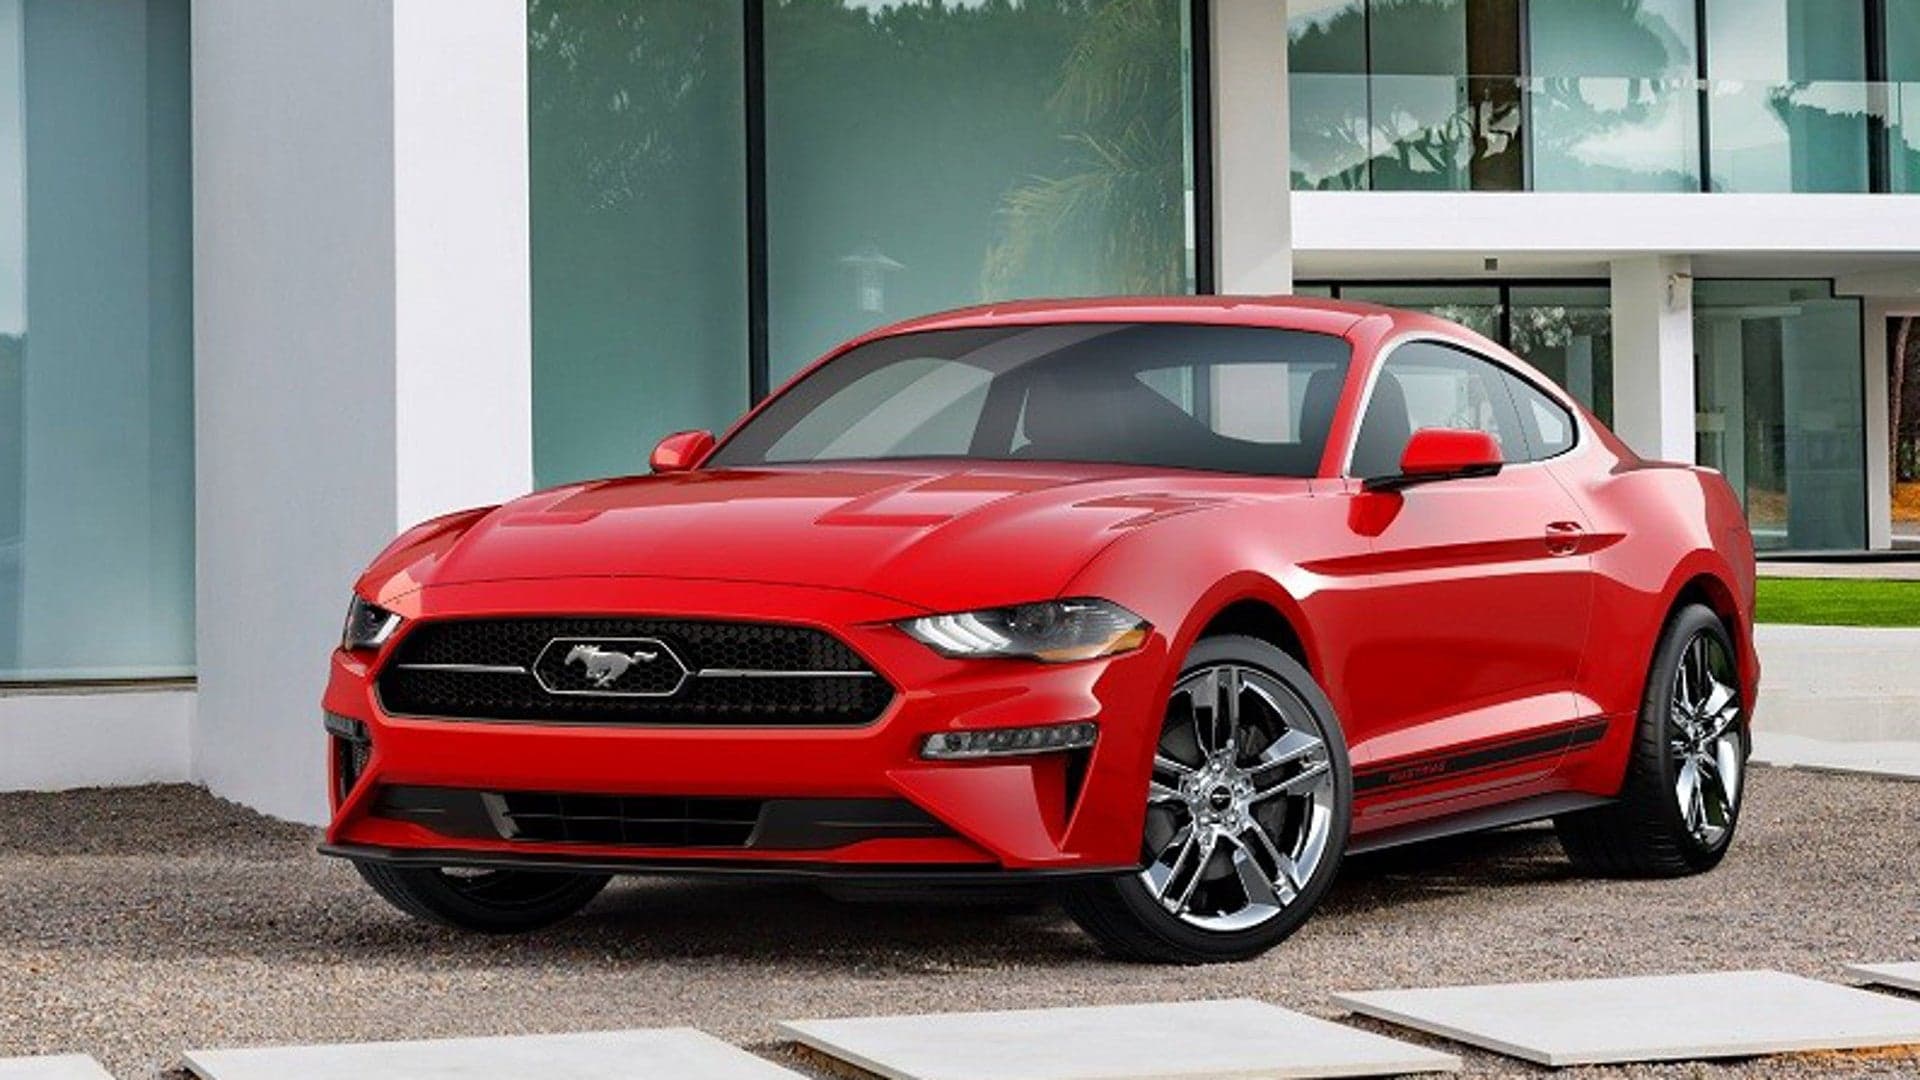 Check Out The 2018 Ford Mustang Pony Package In All Its Retro Glory